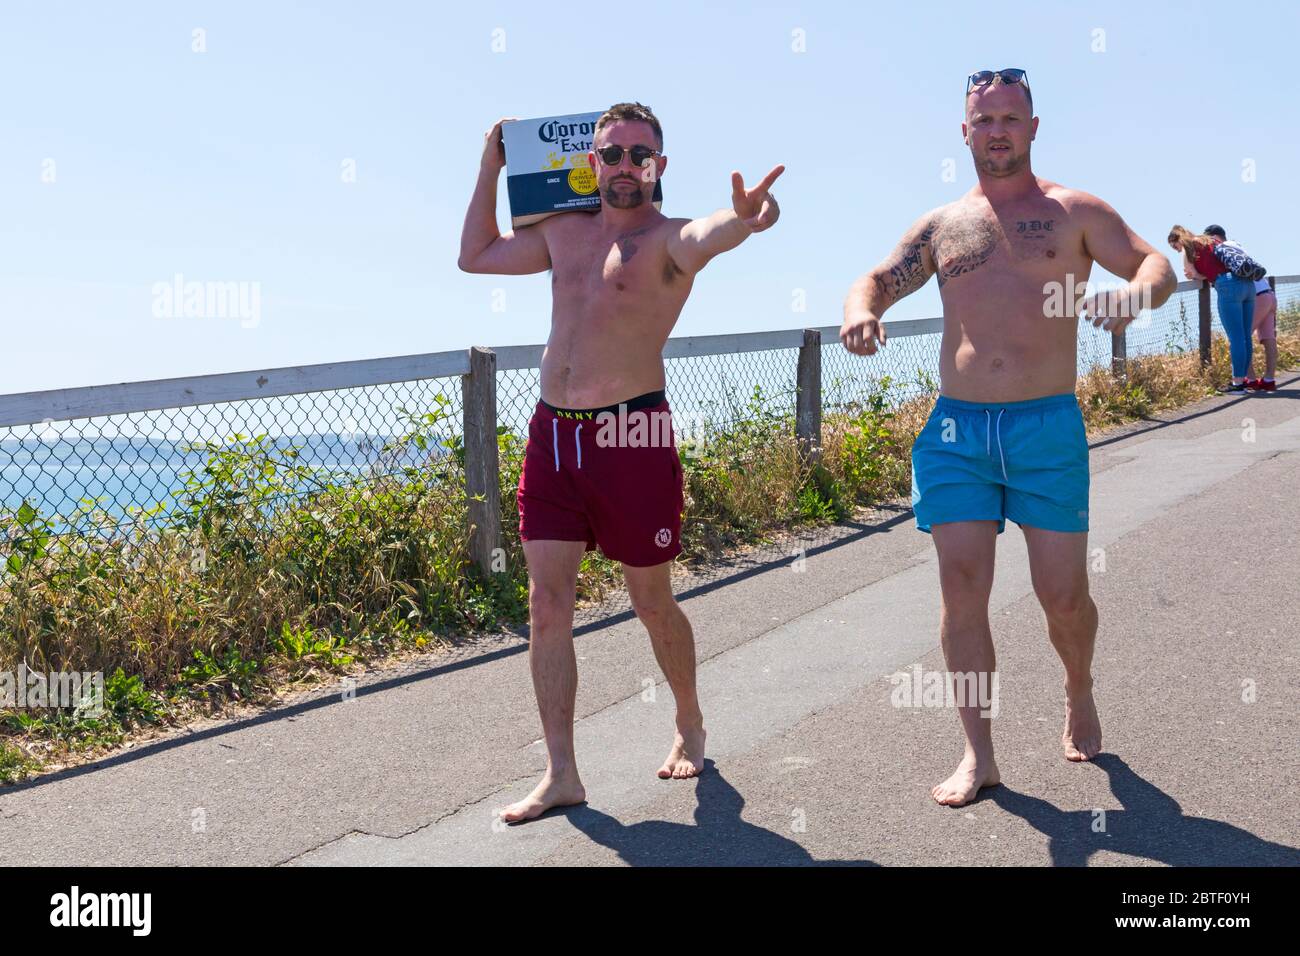 Bournemouth, Dorset UK. 25th May 2020. UK weather: scorching hot at Bournemouth beaches with clear blue skies and unbroken sunshine, as temperatures soar on Bank Holiday Monday. Sunseekers flock to the seaside and beaches are packed, with car parks full and cars left anywhere and everywhere. Ben and John head down to the beach with their supplies - a box of Corona! Credit: Carolyn Jenkins/Alamy Live News Stock Photo